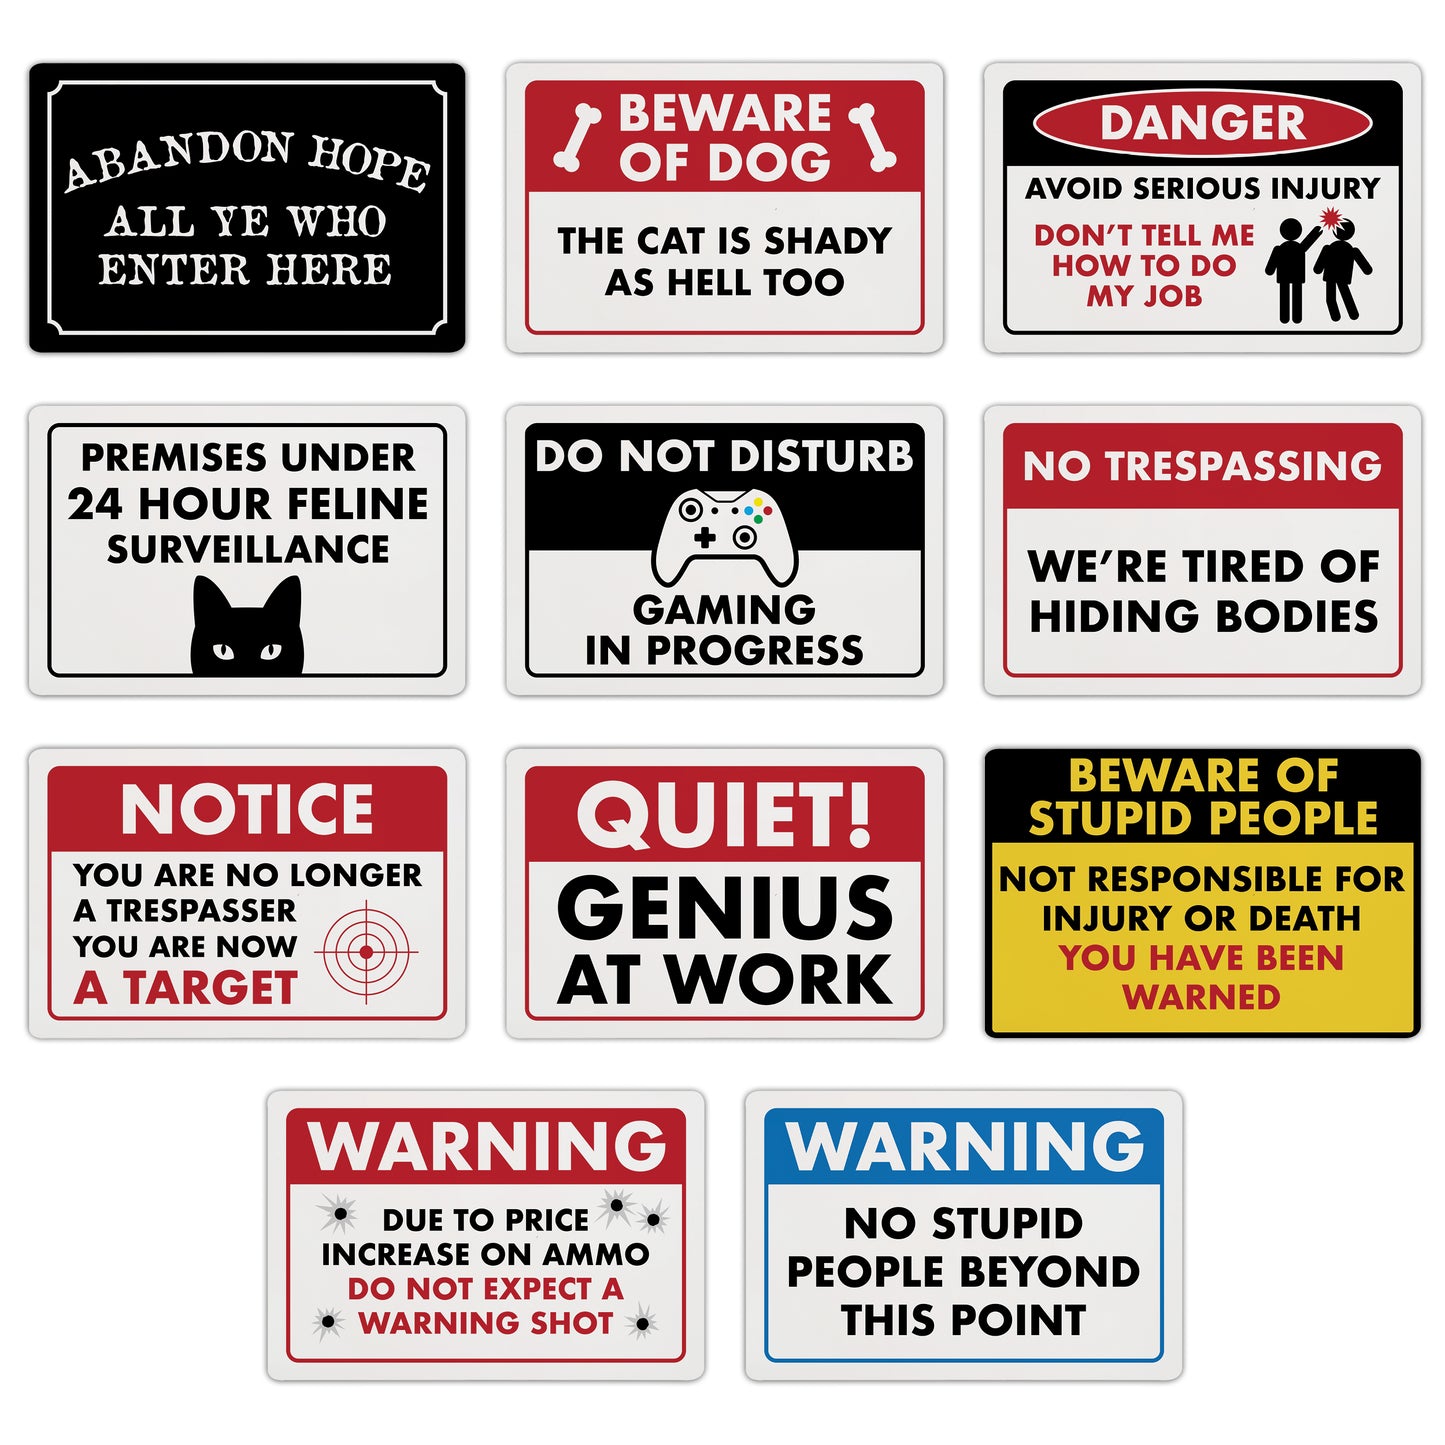 Warning - Due to Price Increase on Ammo Do Not Expect a Warning Shot - 8" x 12" Funny Plastic (PVC) Sign (With Pre-Drilled Holes for Easy Mounting)